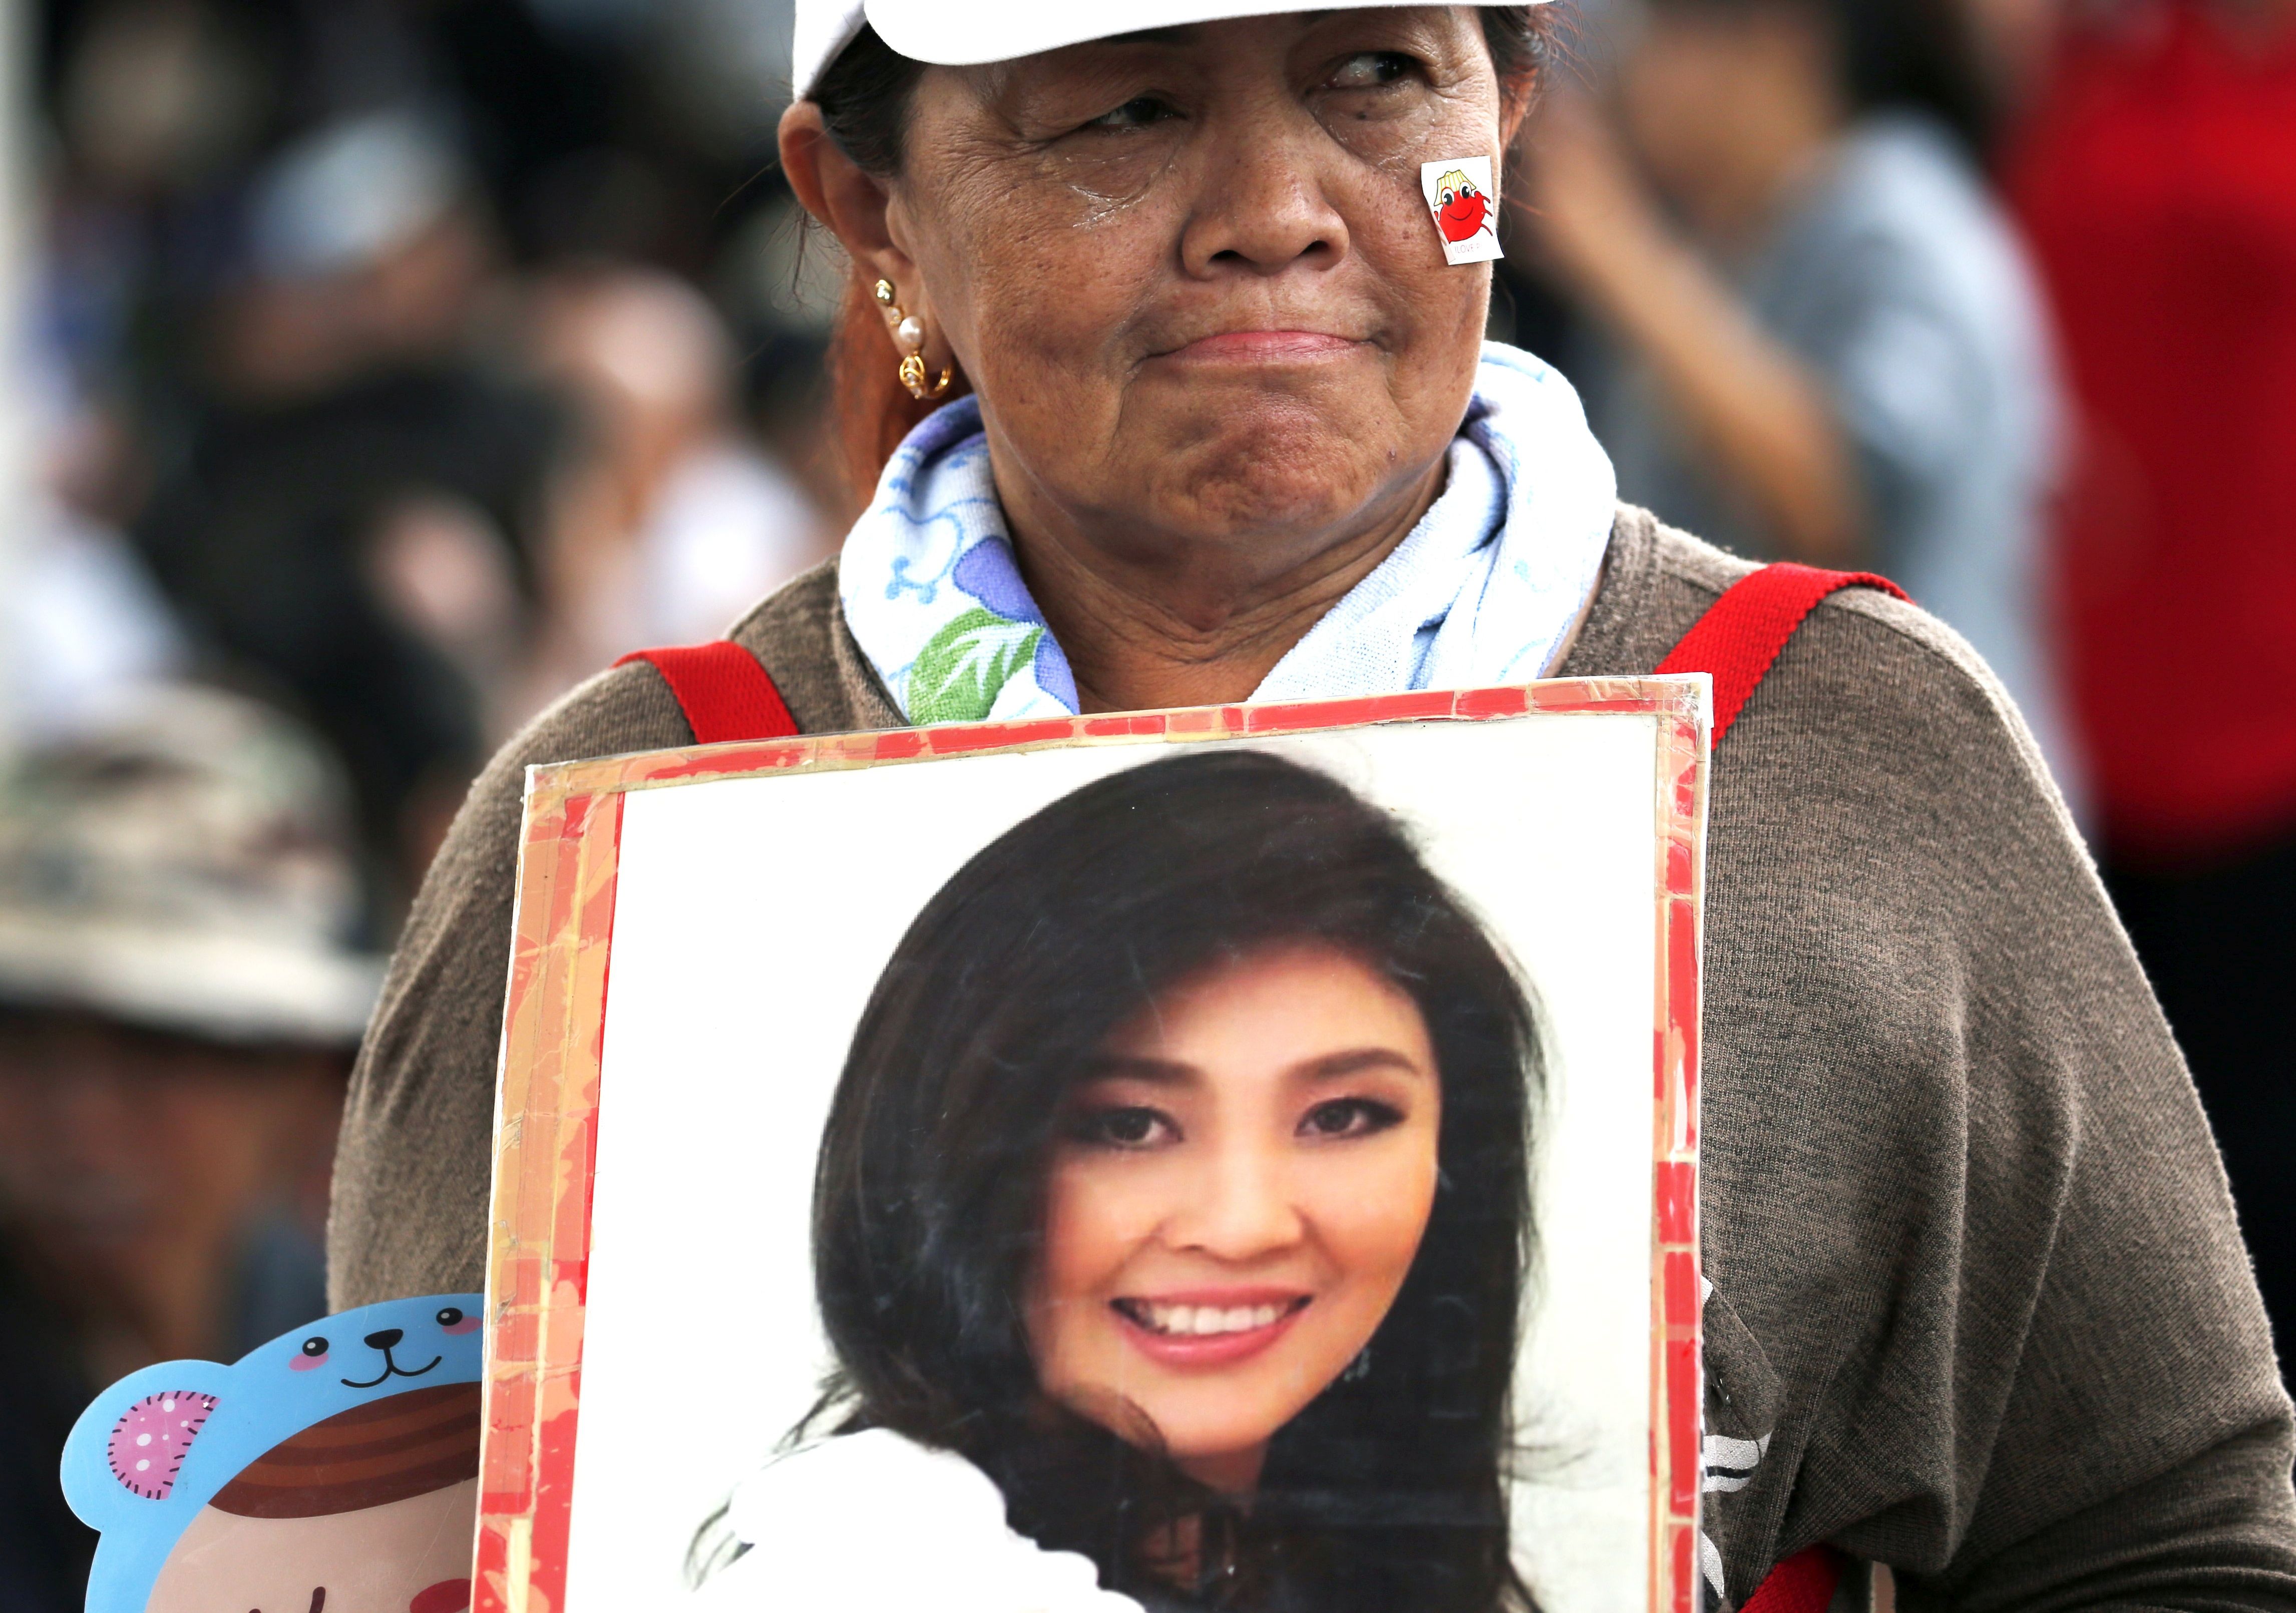 epa06161373 A supporter holds a photograph of former prime minister Yingluck Shinawatra after she failed to appear to hear her verdict at the Supreme Court's Criminal Division for Persons Holding Political Positions in Bangkok, Thailand, 25 August 2017. The Thai court issued an arrest warrant for Yingluck after she failed to appear in court for her verdict and set the new verdict date for 27 September 2017 in which she stands accused on charges of criminal negligence to stop corruption in her government's controversial rice-pledging scheme. Yingluck, who was overthrown in a 2014 military coup, will face up to 10 years in prison if the court finds her guilty.  EPA/RUNGROJ YONGRIT